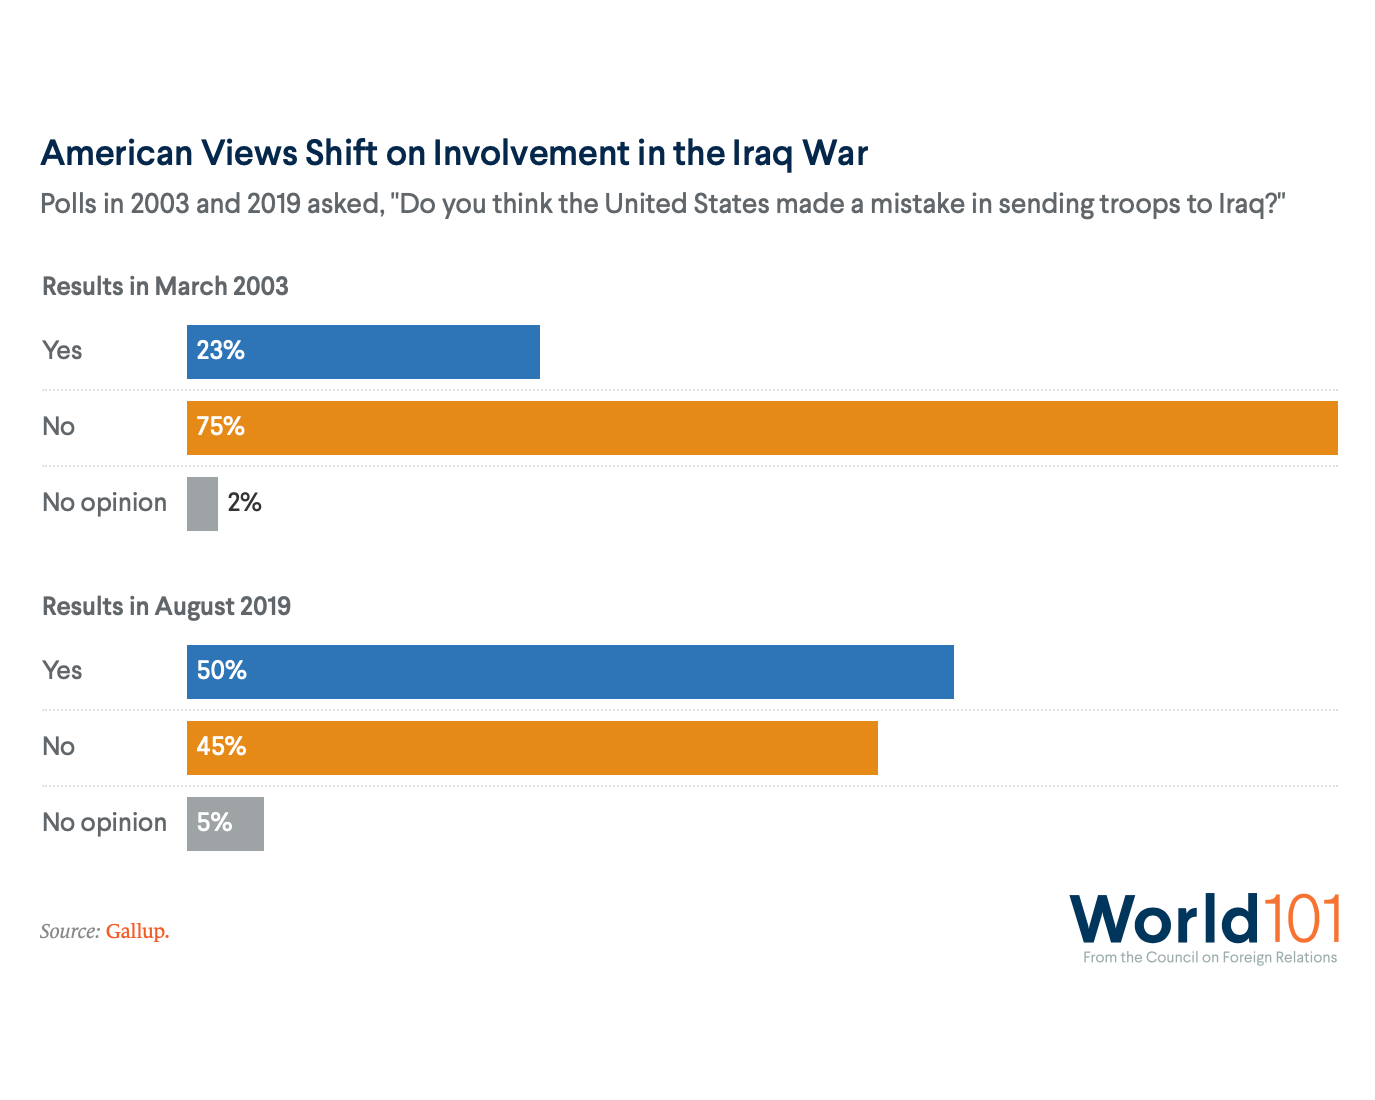 Chart showing results of polls of Americans in 2003 & 2019 asking whether US made a mistake in sending troops to Iraq? In March 2003, 75 percent said "No". In August 2019, 50 percent said "Yes." For more info contact us at world101@cfr.org.